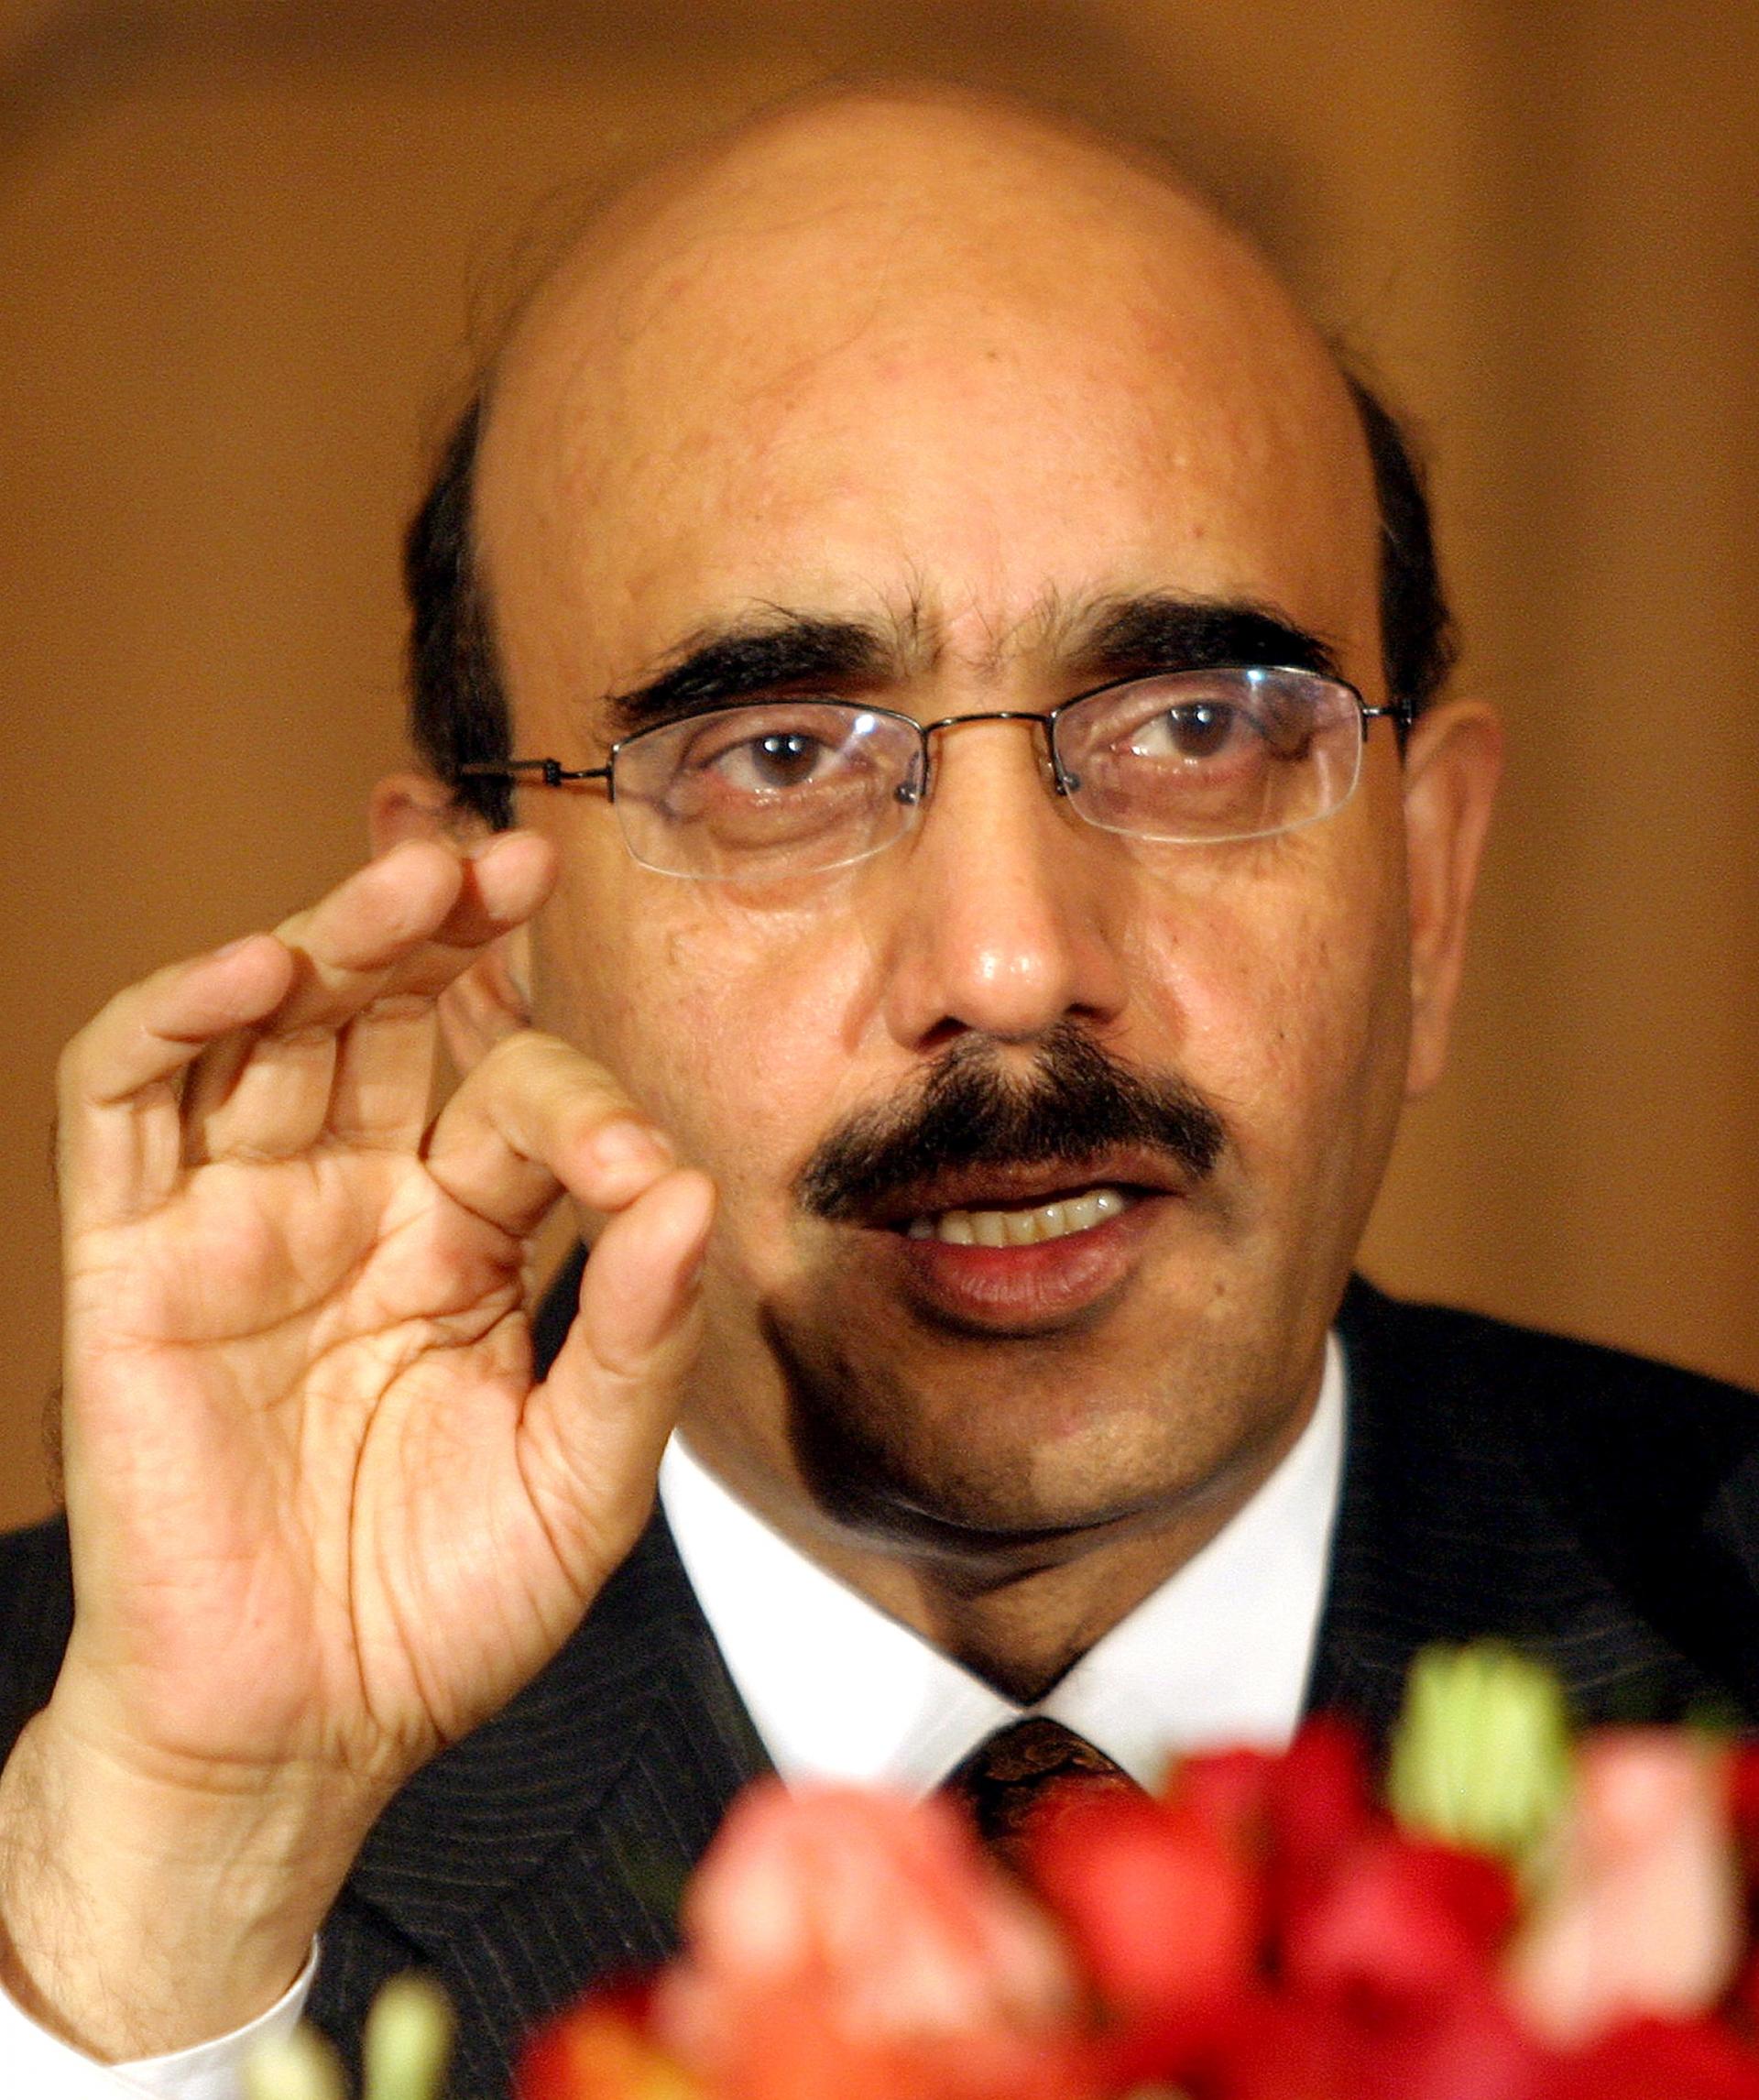 Sardar Masood Khan, president of the Pakistani side of divided Kashmir, gestures during a news conference at Pakistan's foreign ministry in Islamabad, December 23, 2004.